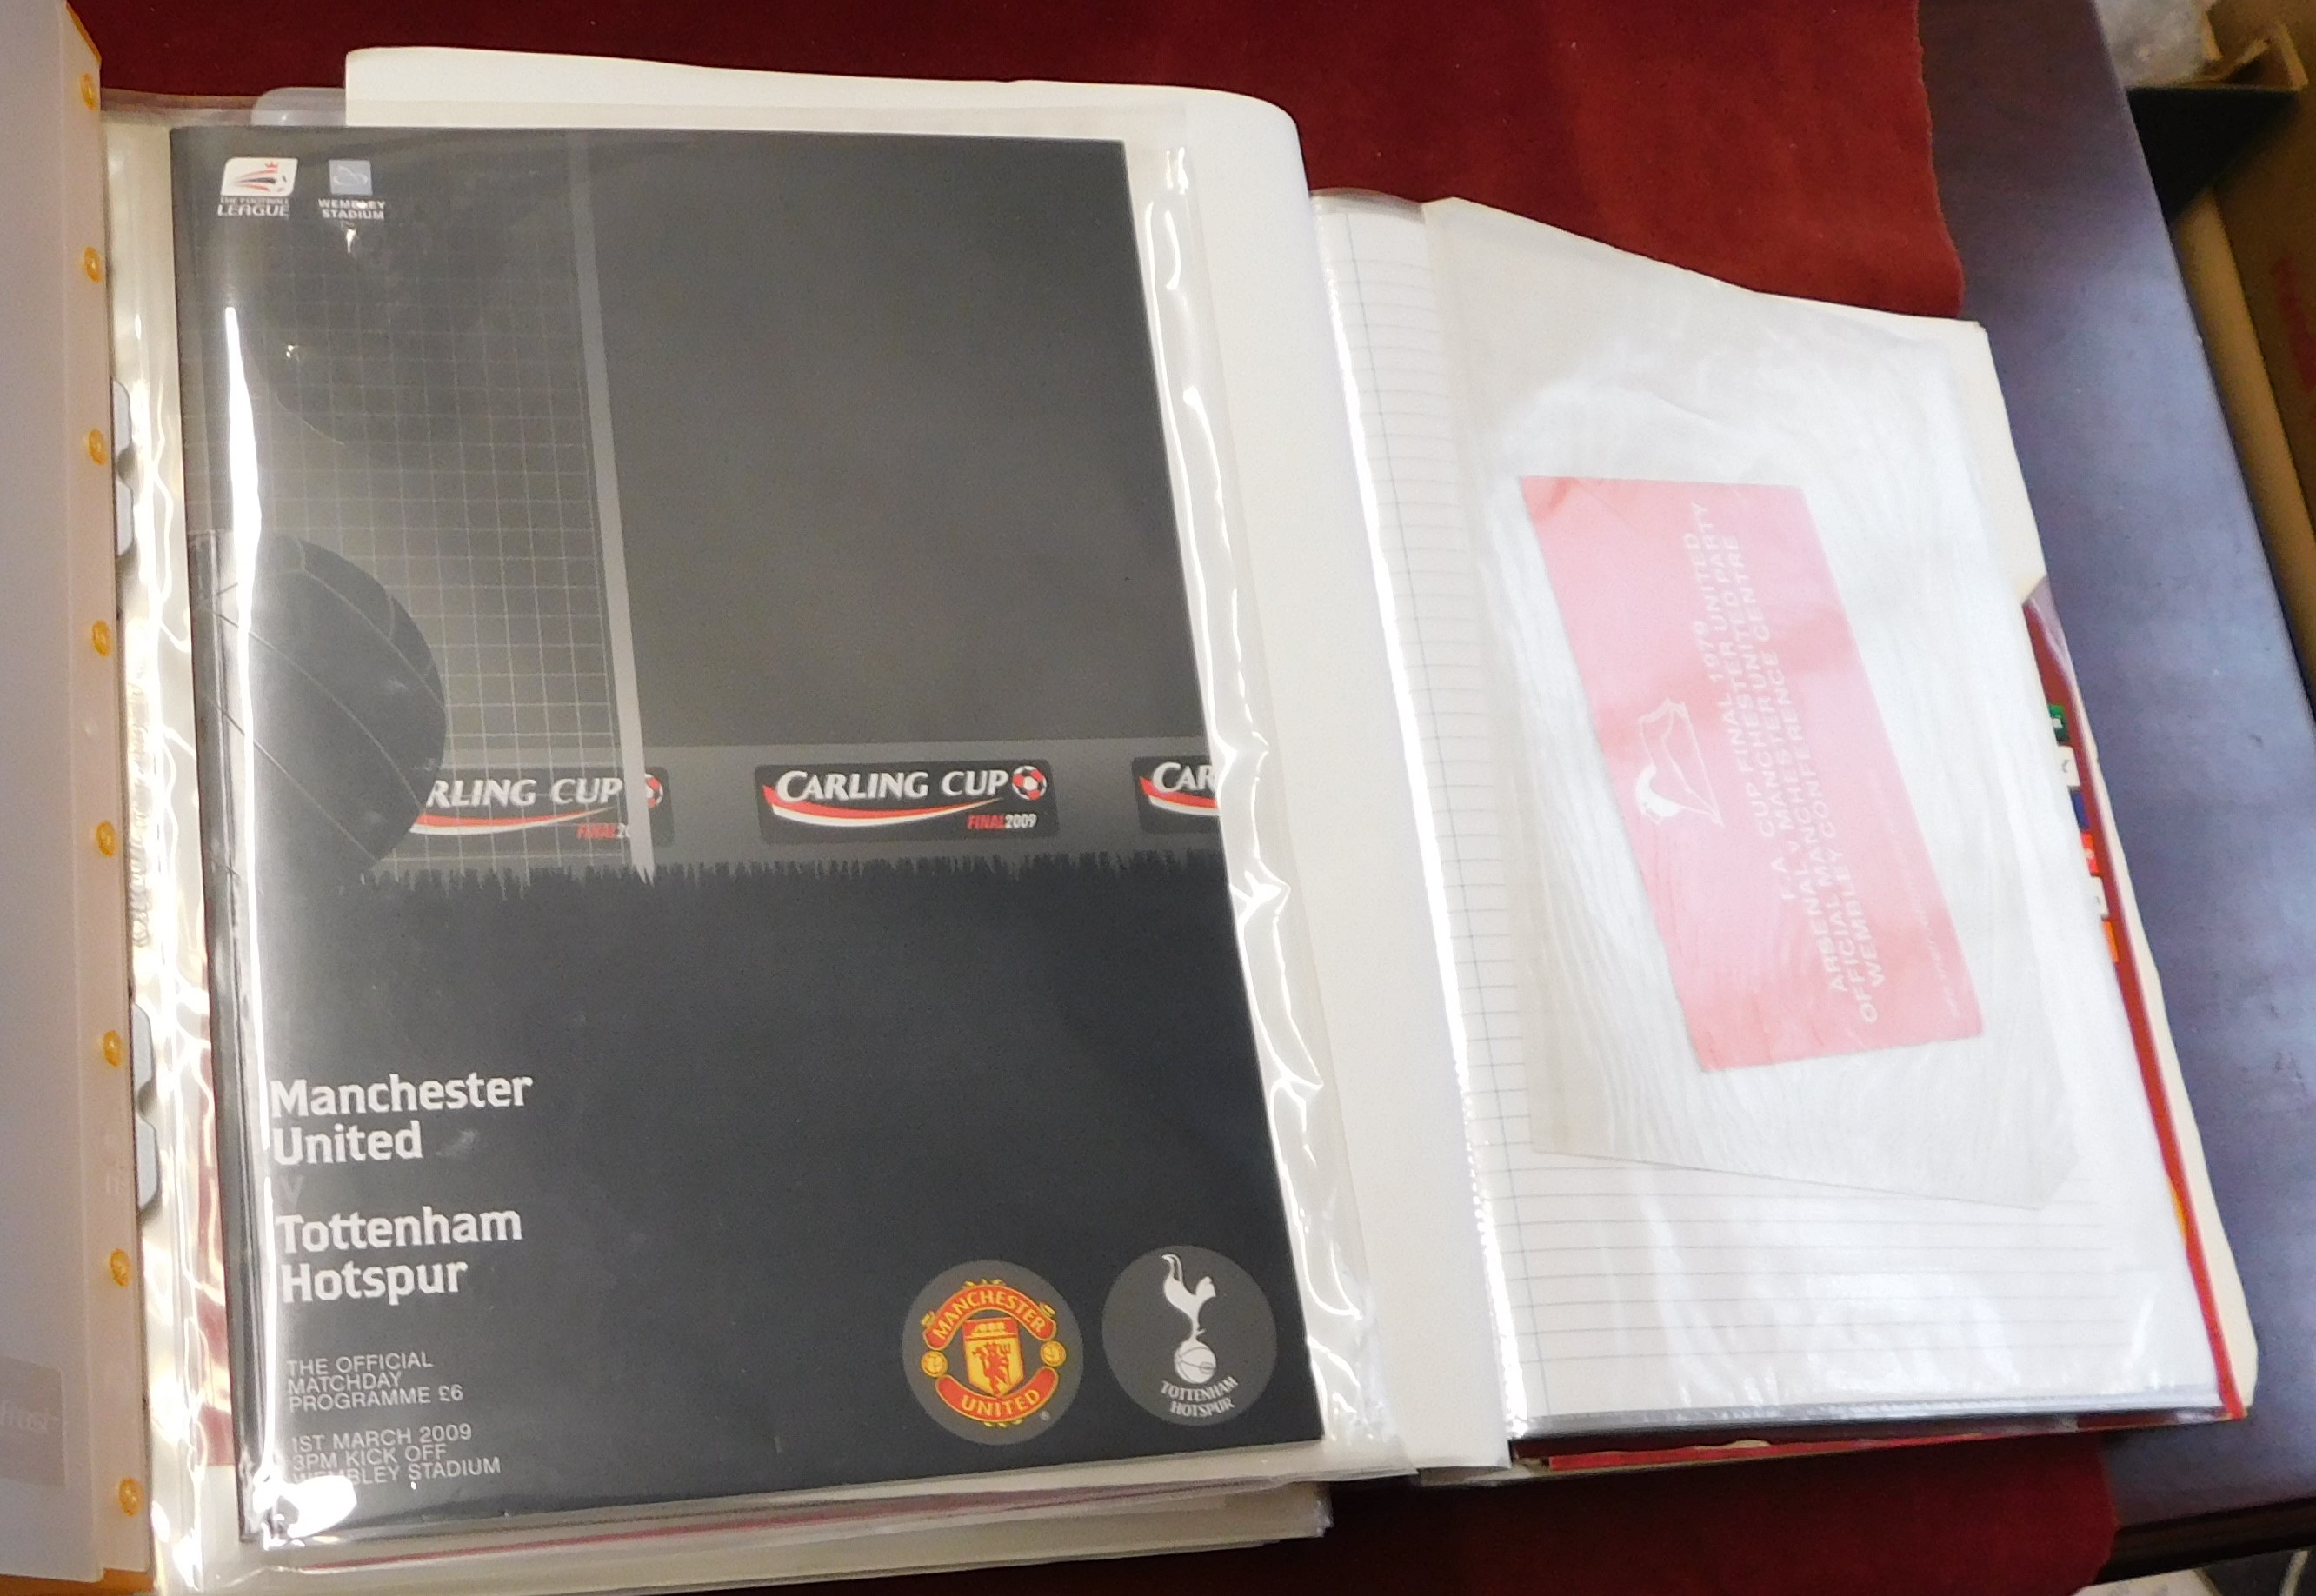 Three folders of Manchester United ephemera from the 1970s to the 2000s. A hospitality card at